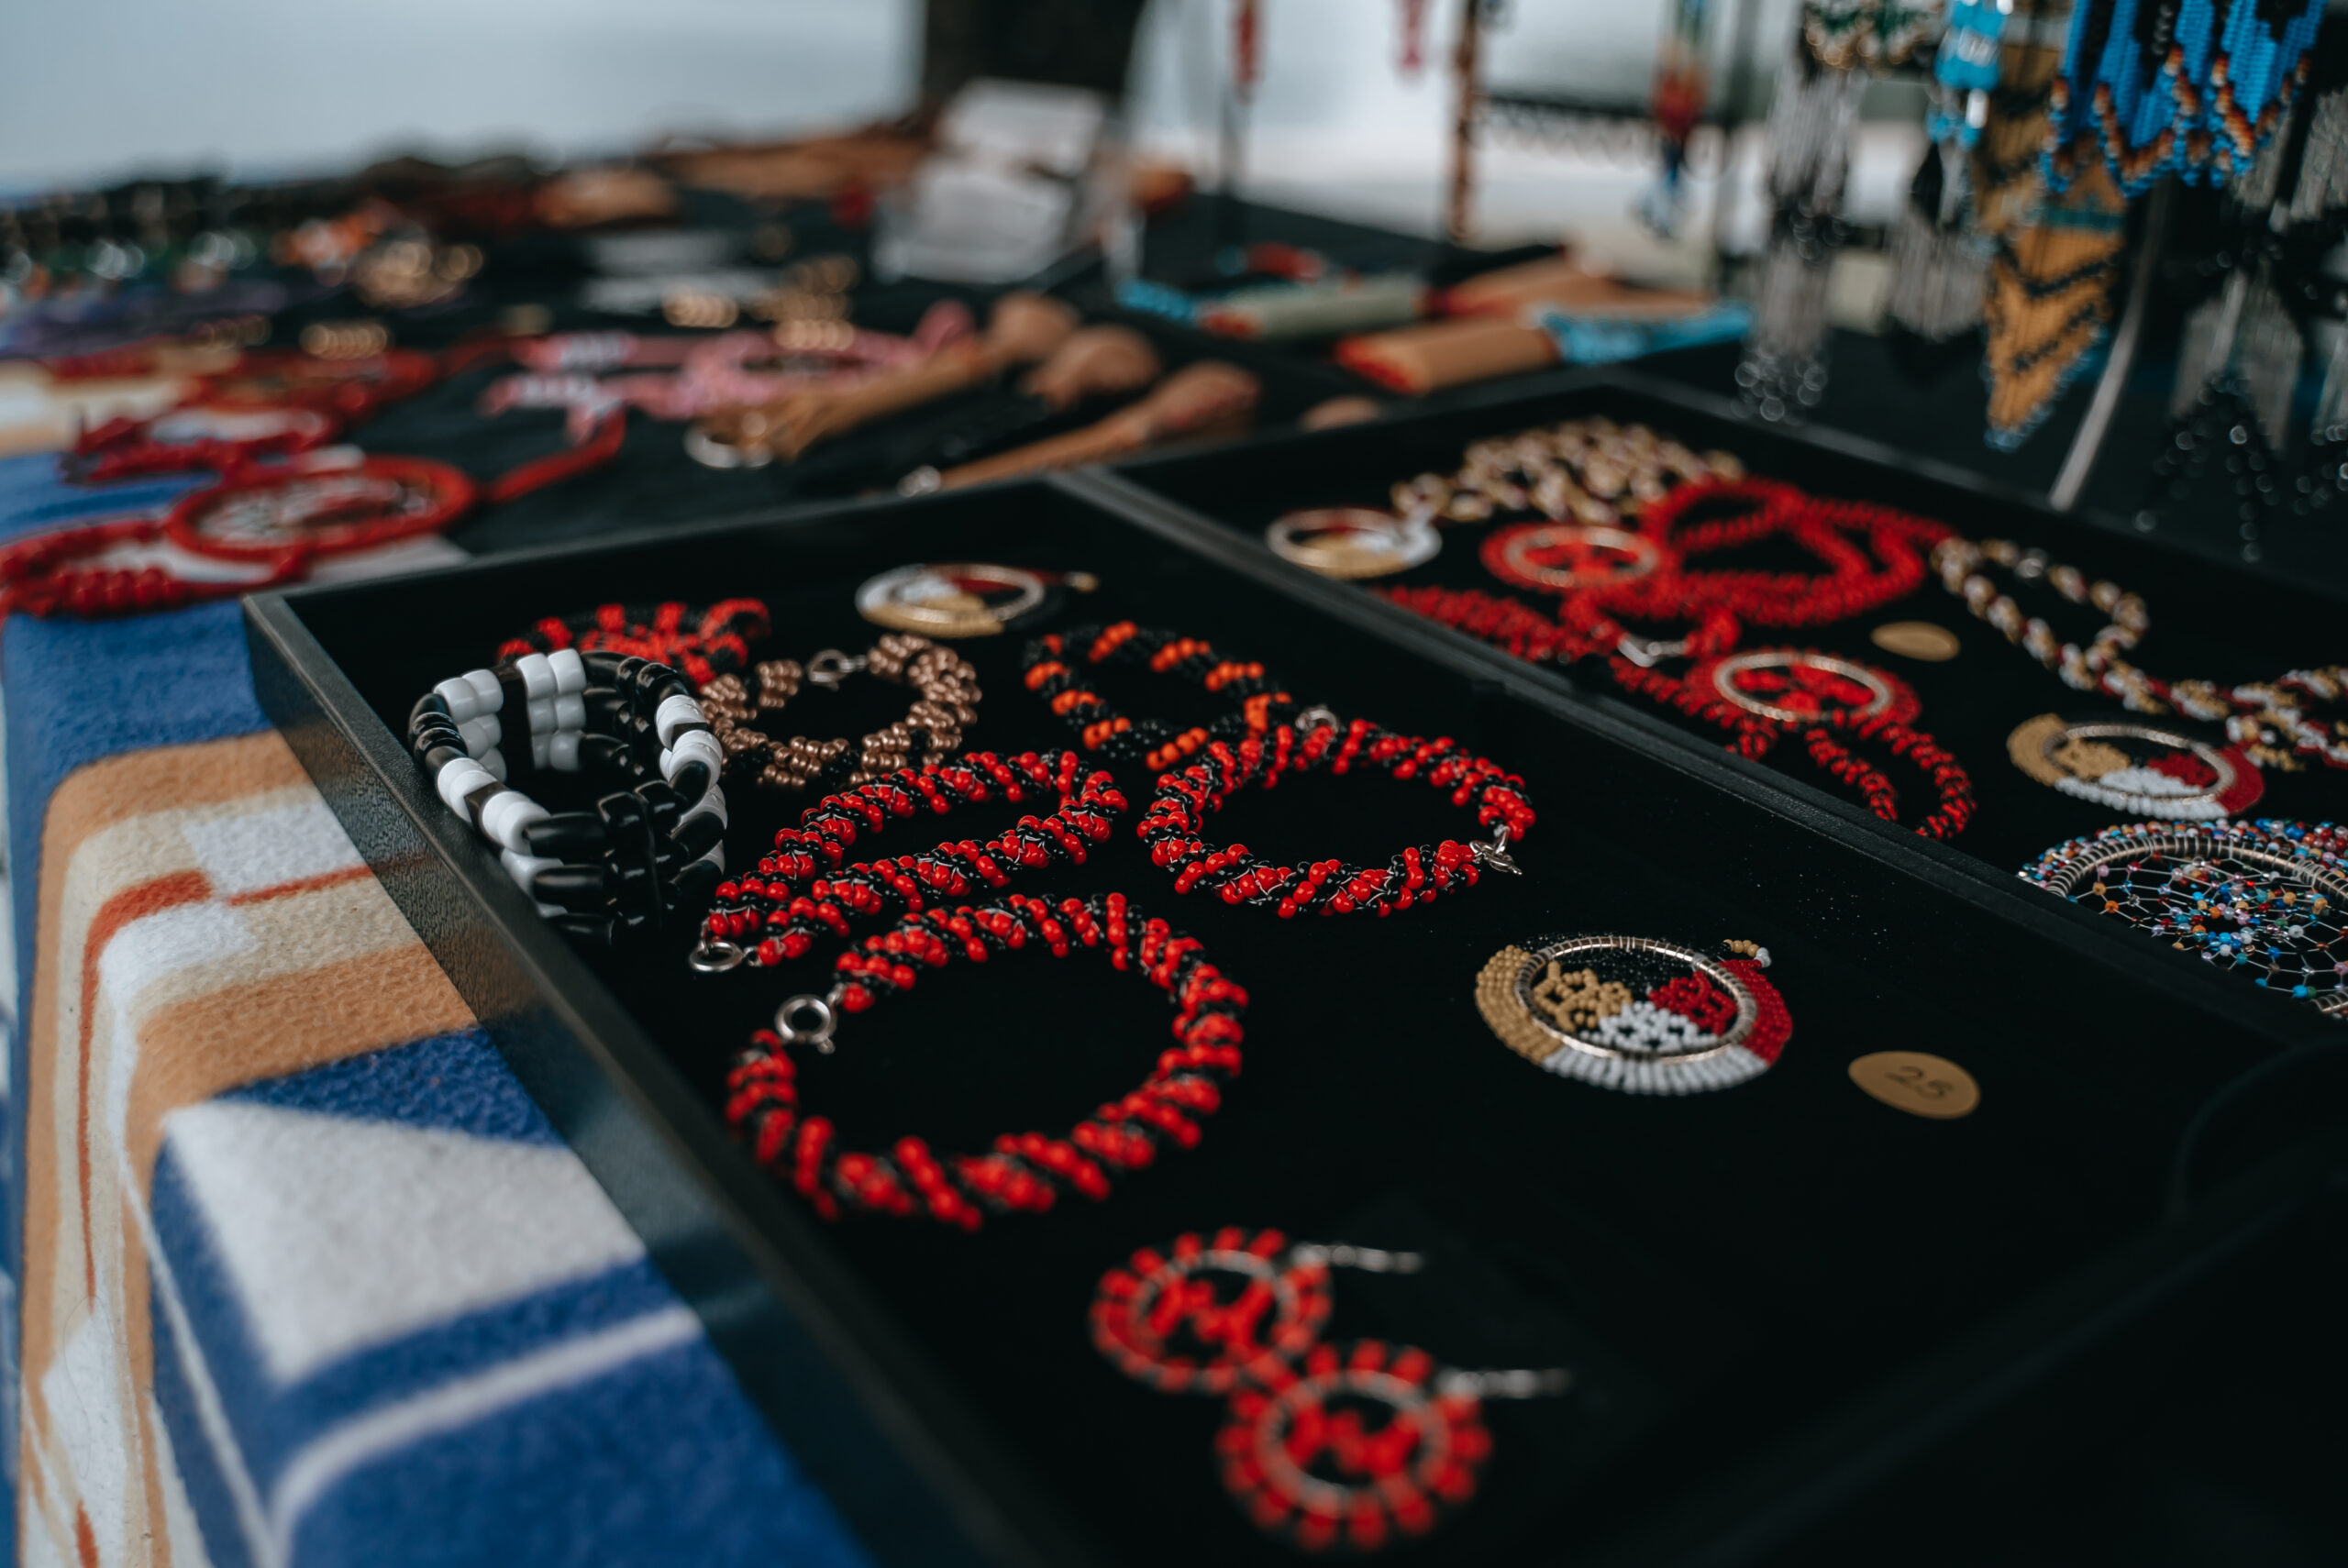 Indigenous jewellery on display on a table.